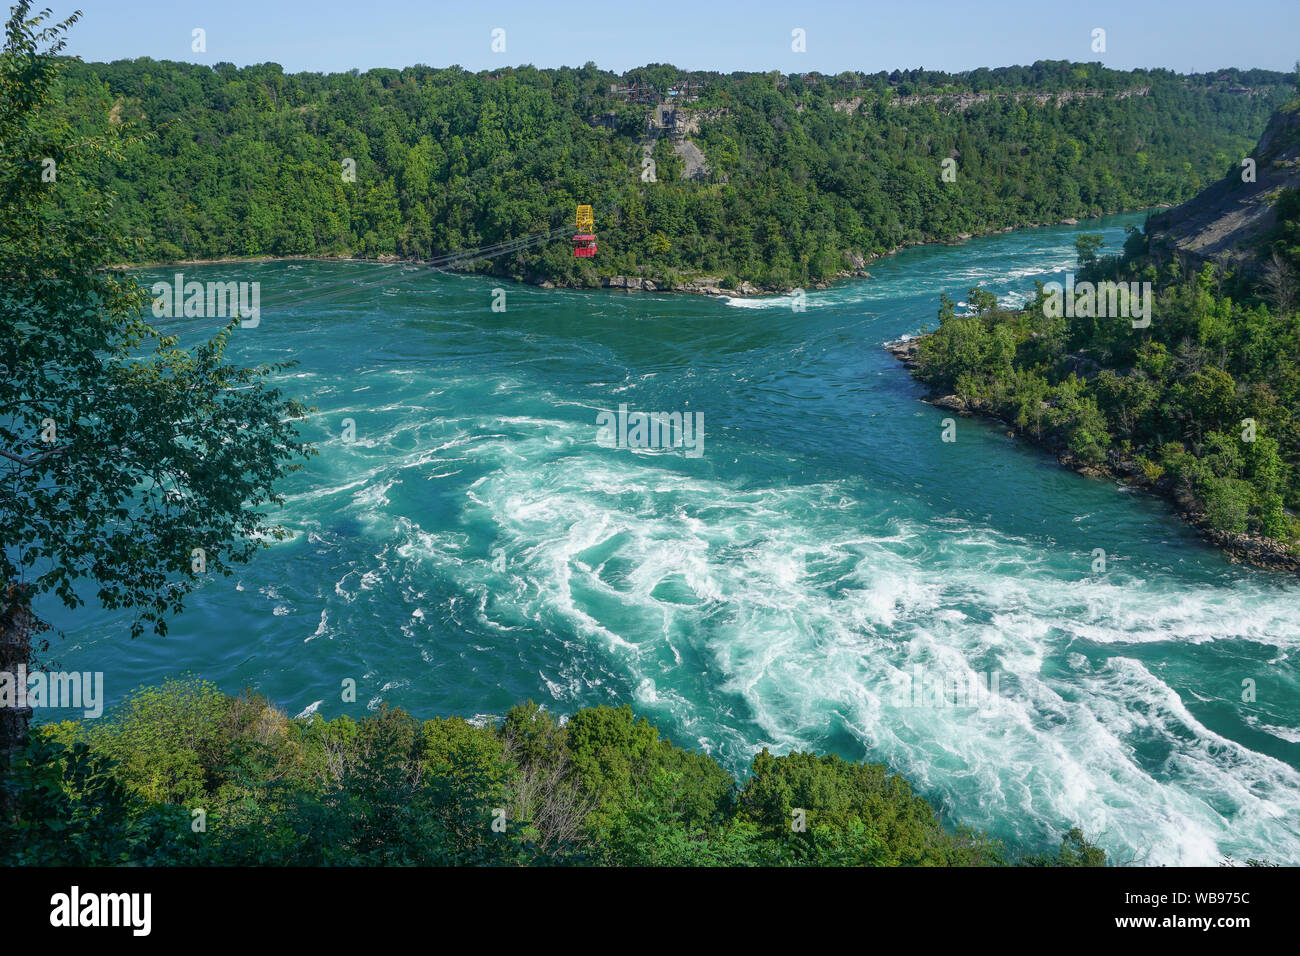 Niagara Falls, Ontario, Canada: An antique cable cars carries visitors across the Niagara River, over the Whirlpool Rapids. Stock Photo